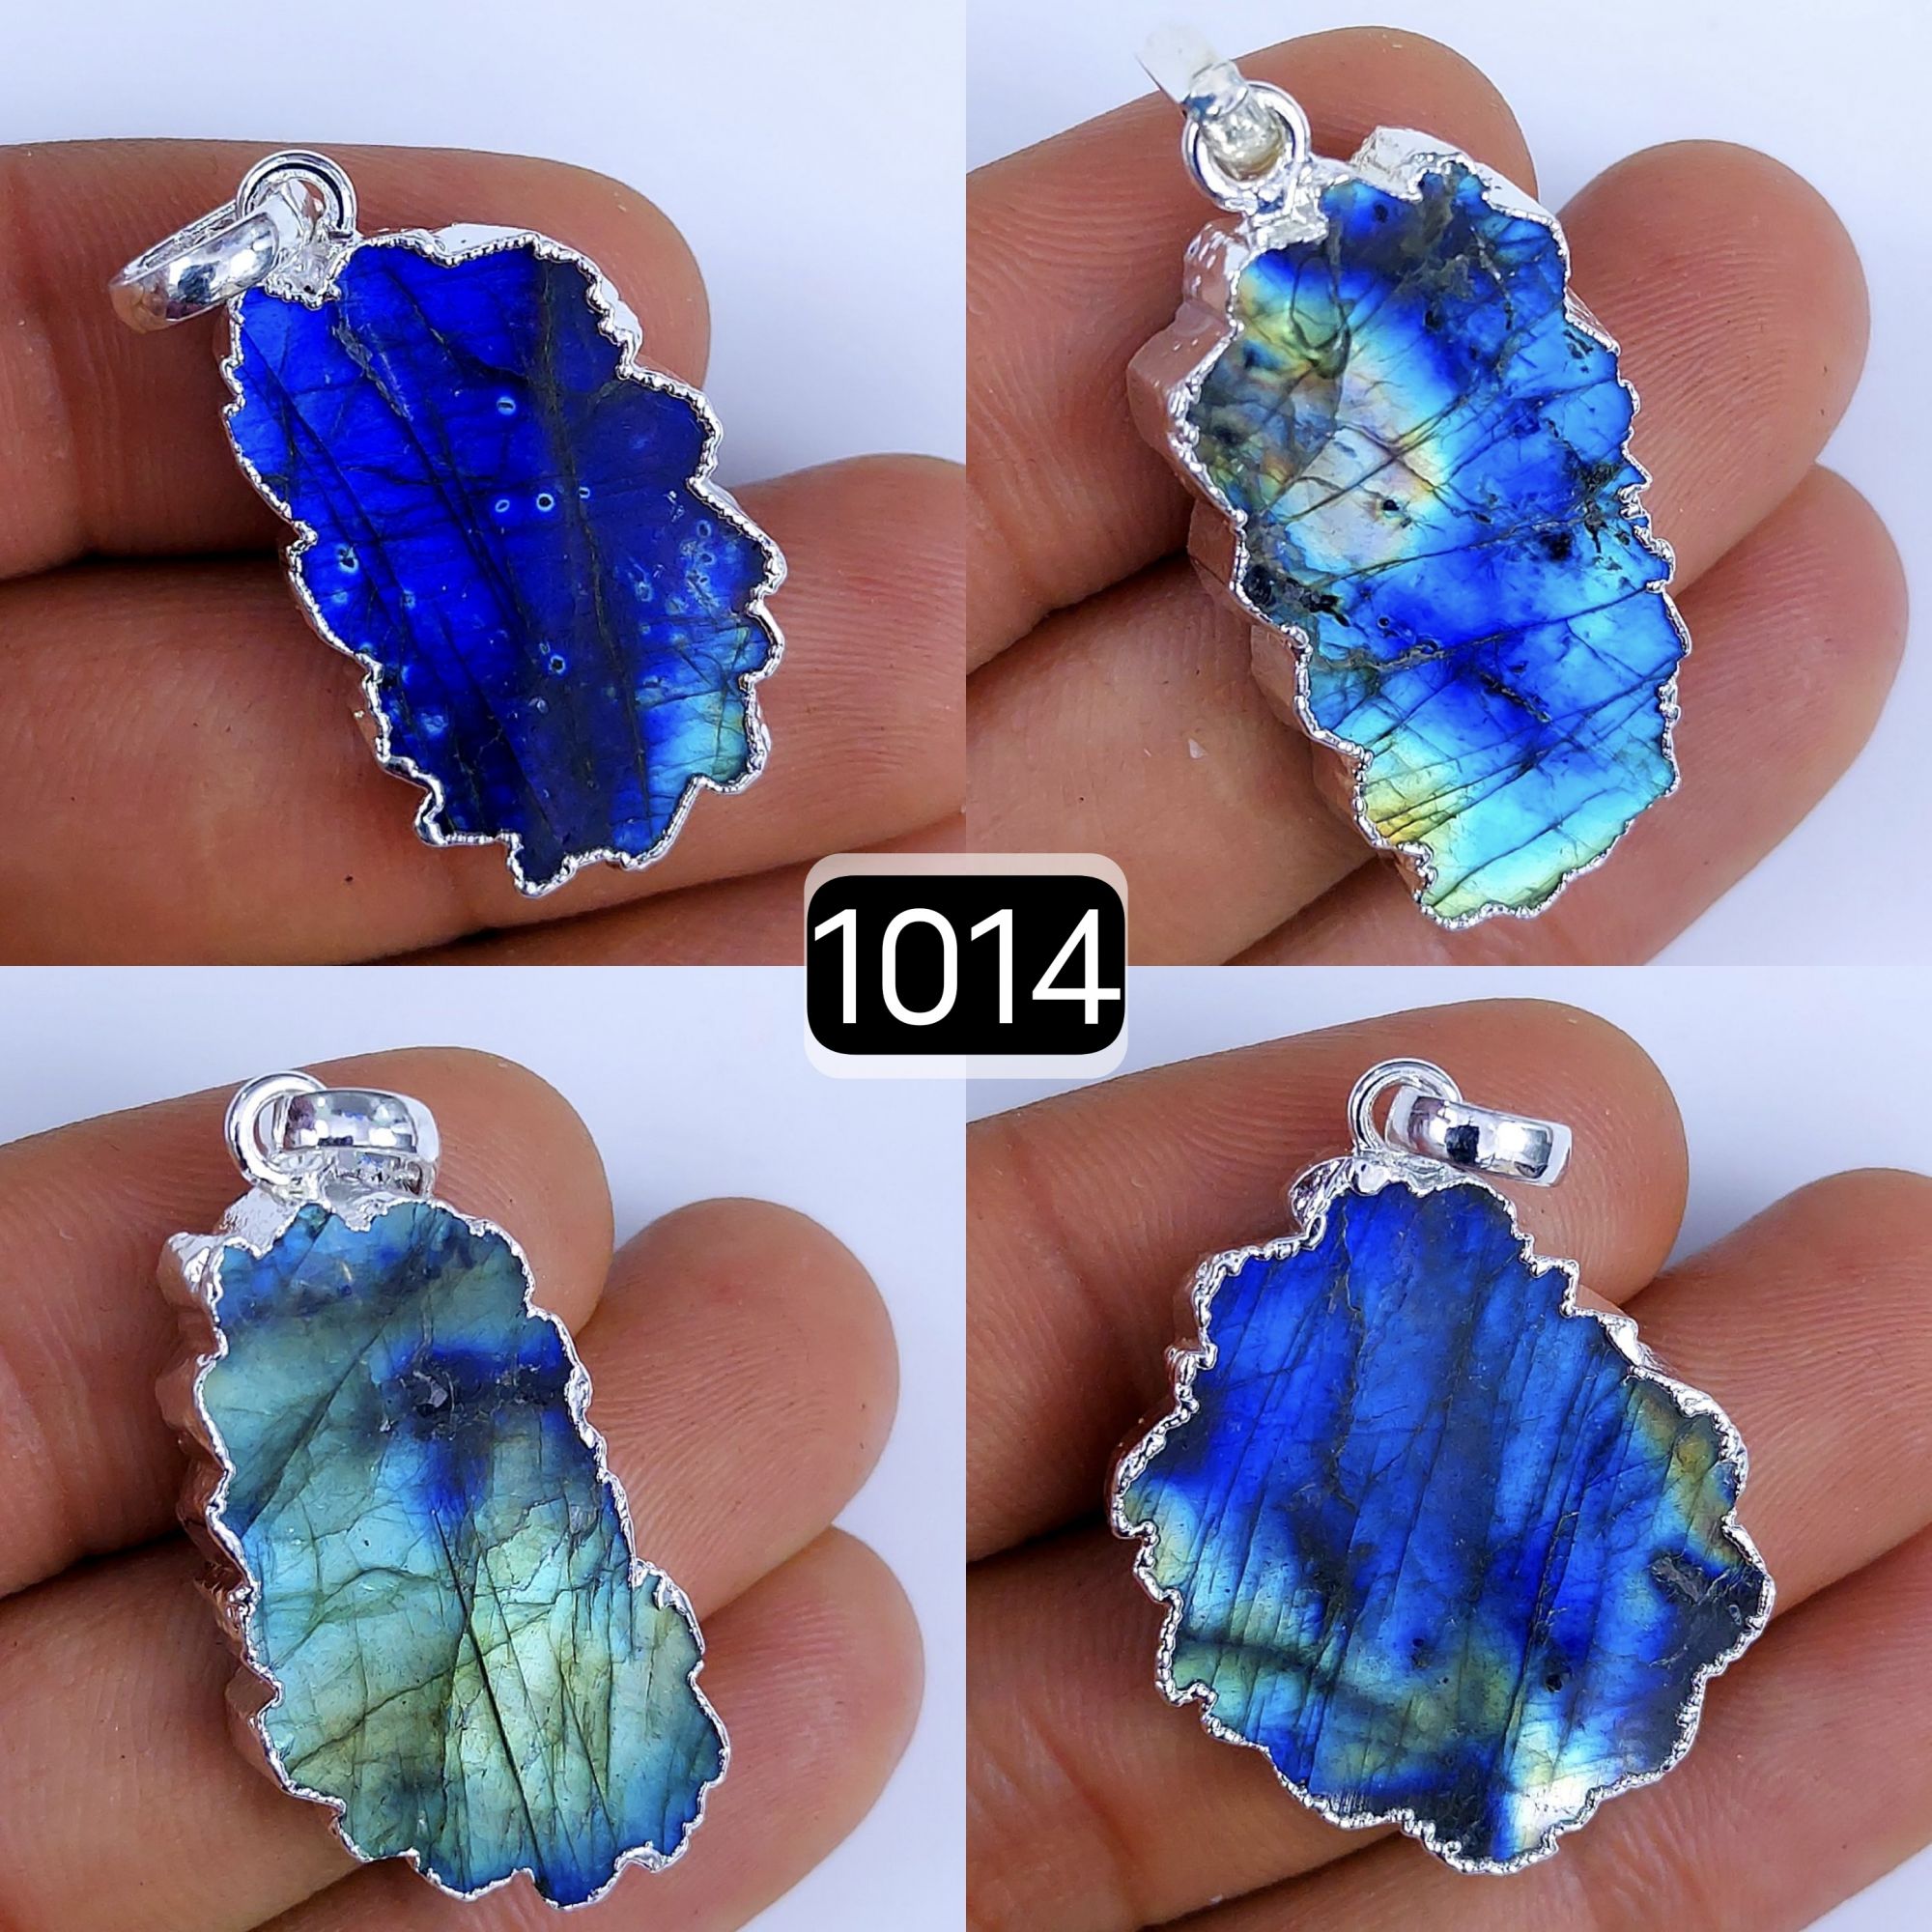 140Cts Natural Blue Labradorite Silver Electroplated Slice Pendant 32x18 22x12mm#1014